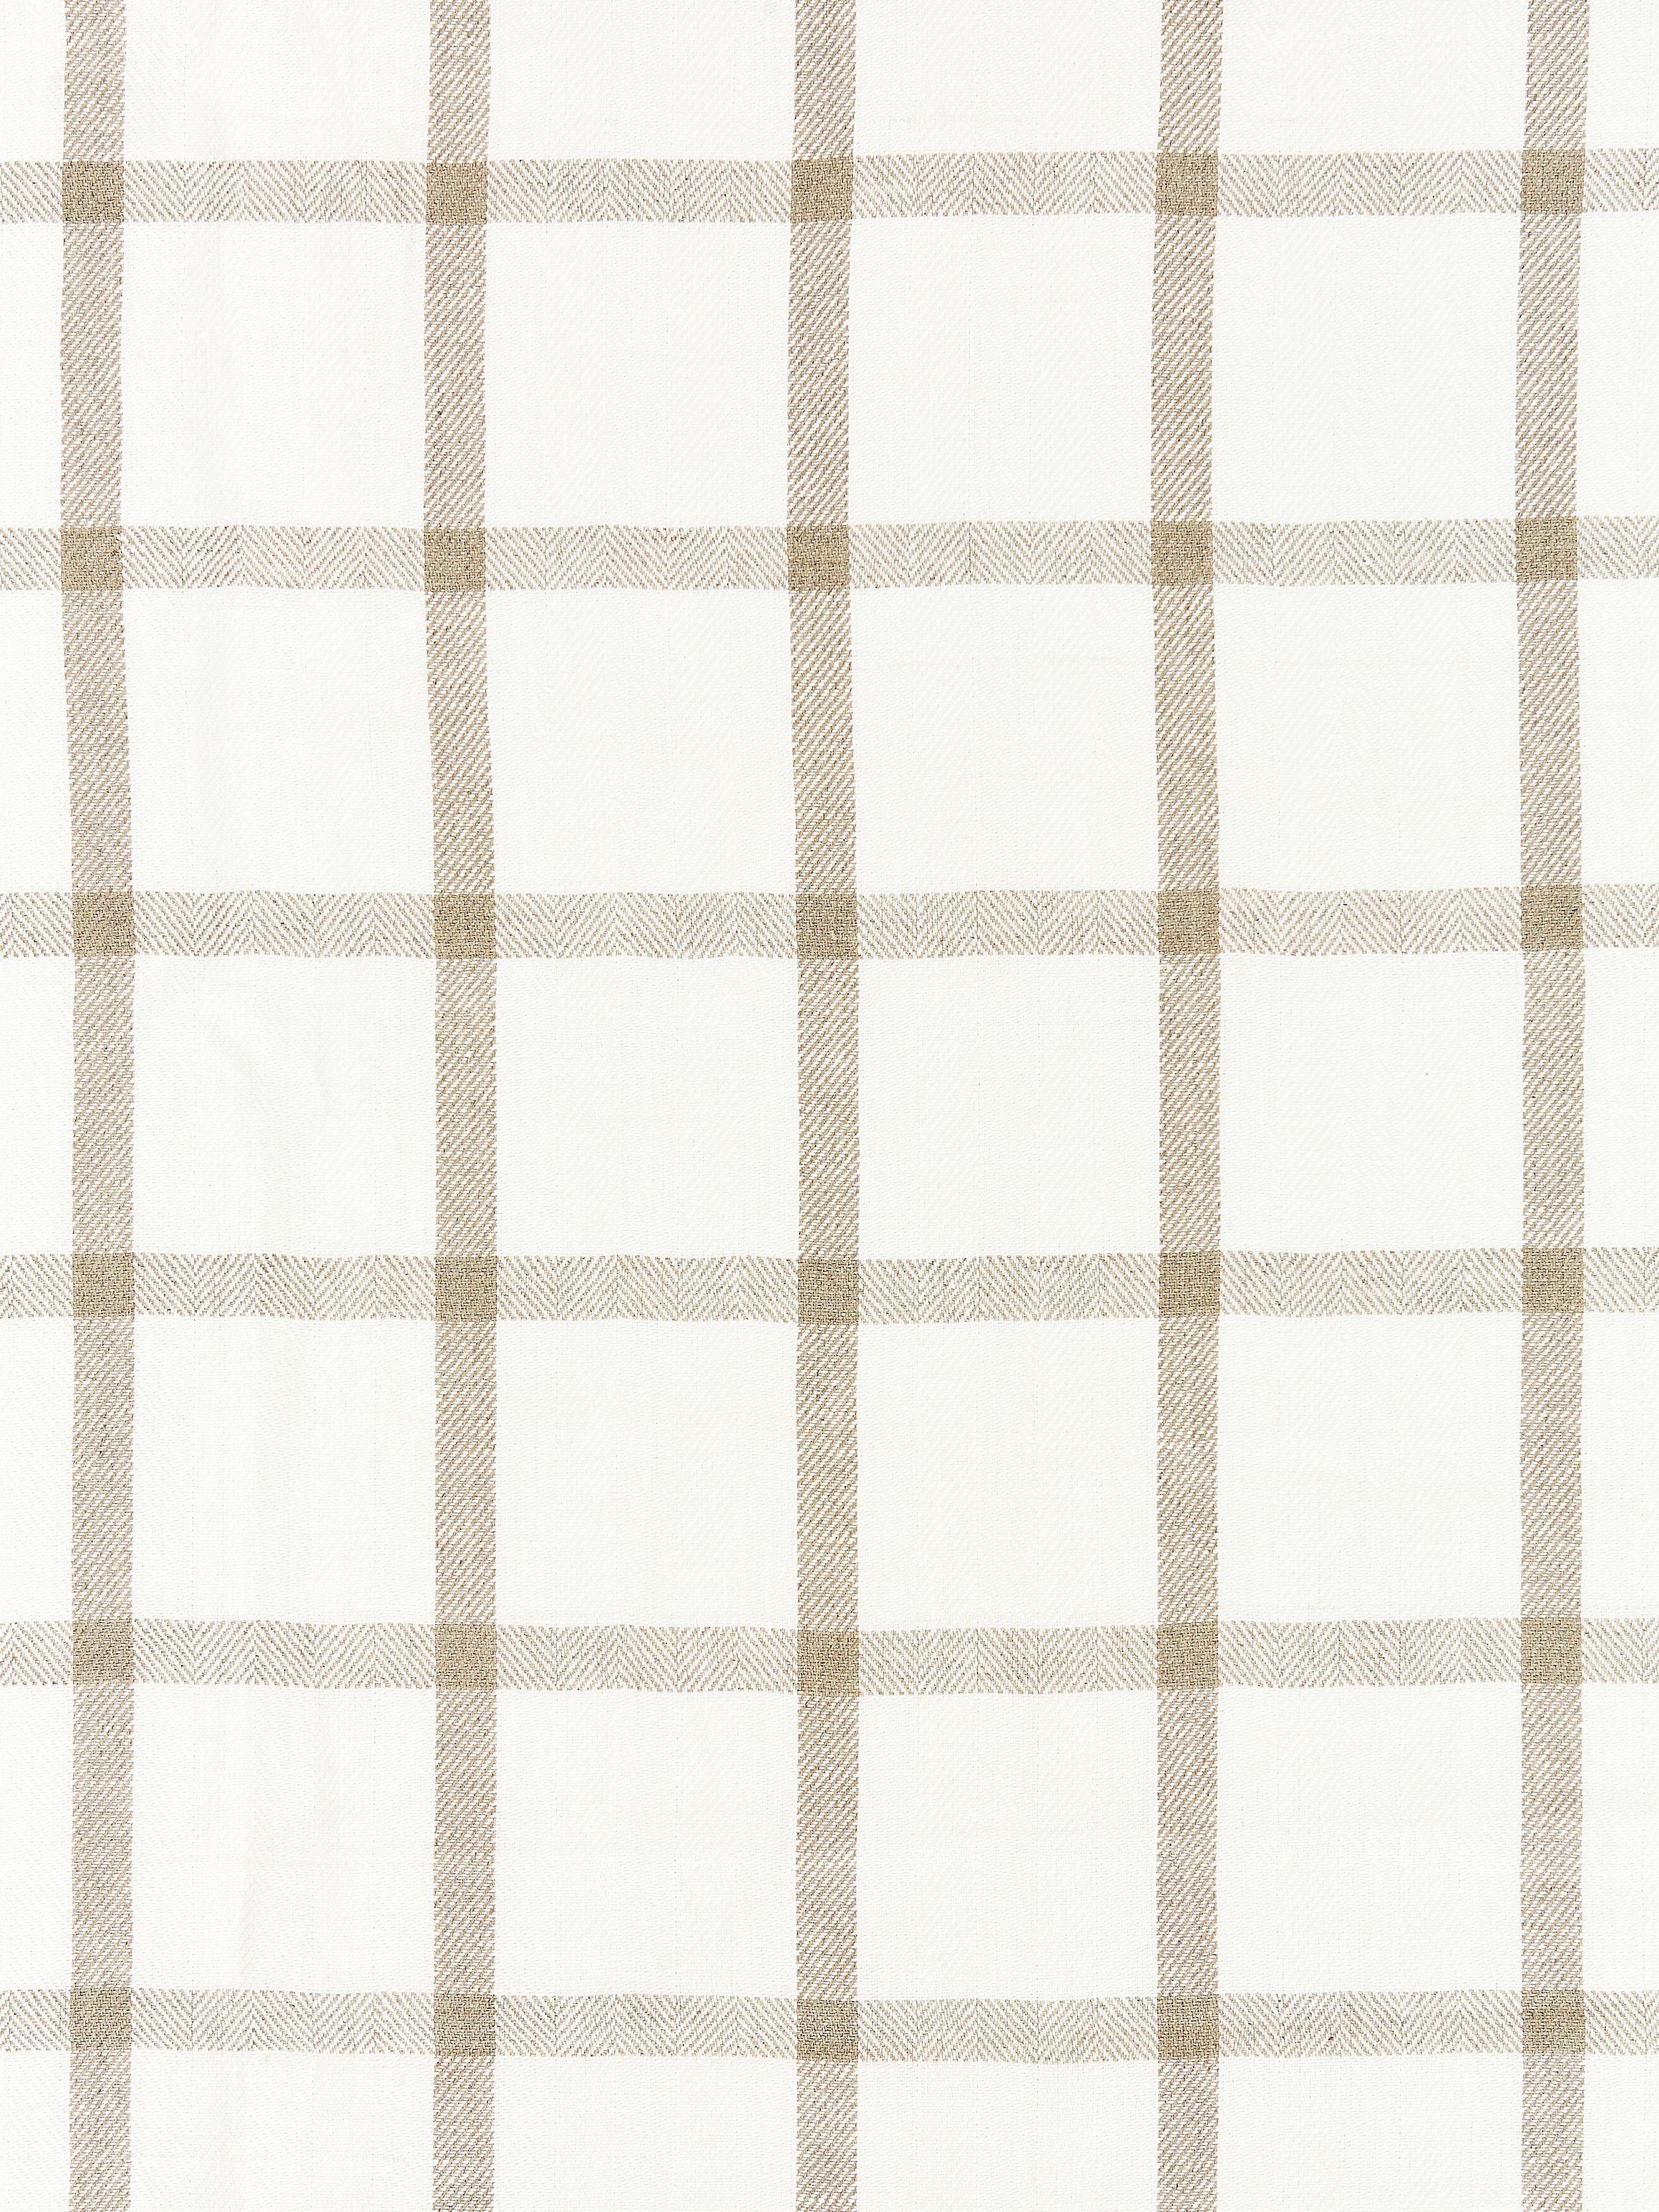 Wilton Linen Check fabric in linen color - pattern number SC 000127152 - by Scalamandre in the Scalamandre Fabrics Book 1 collection